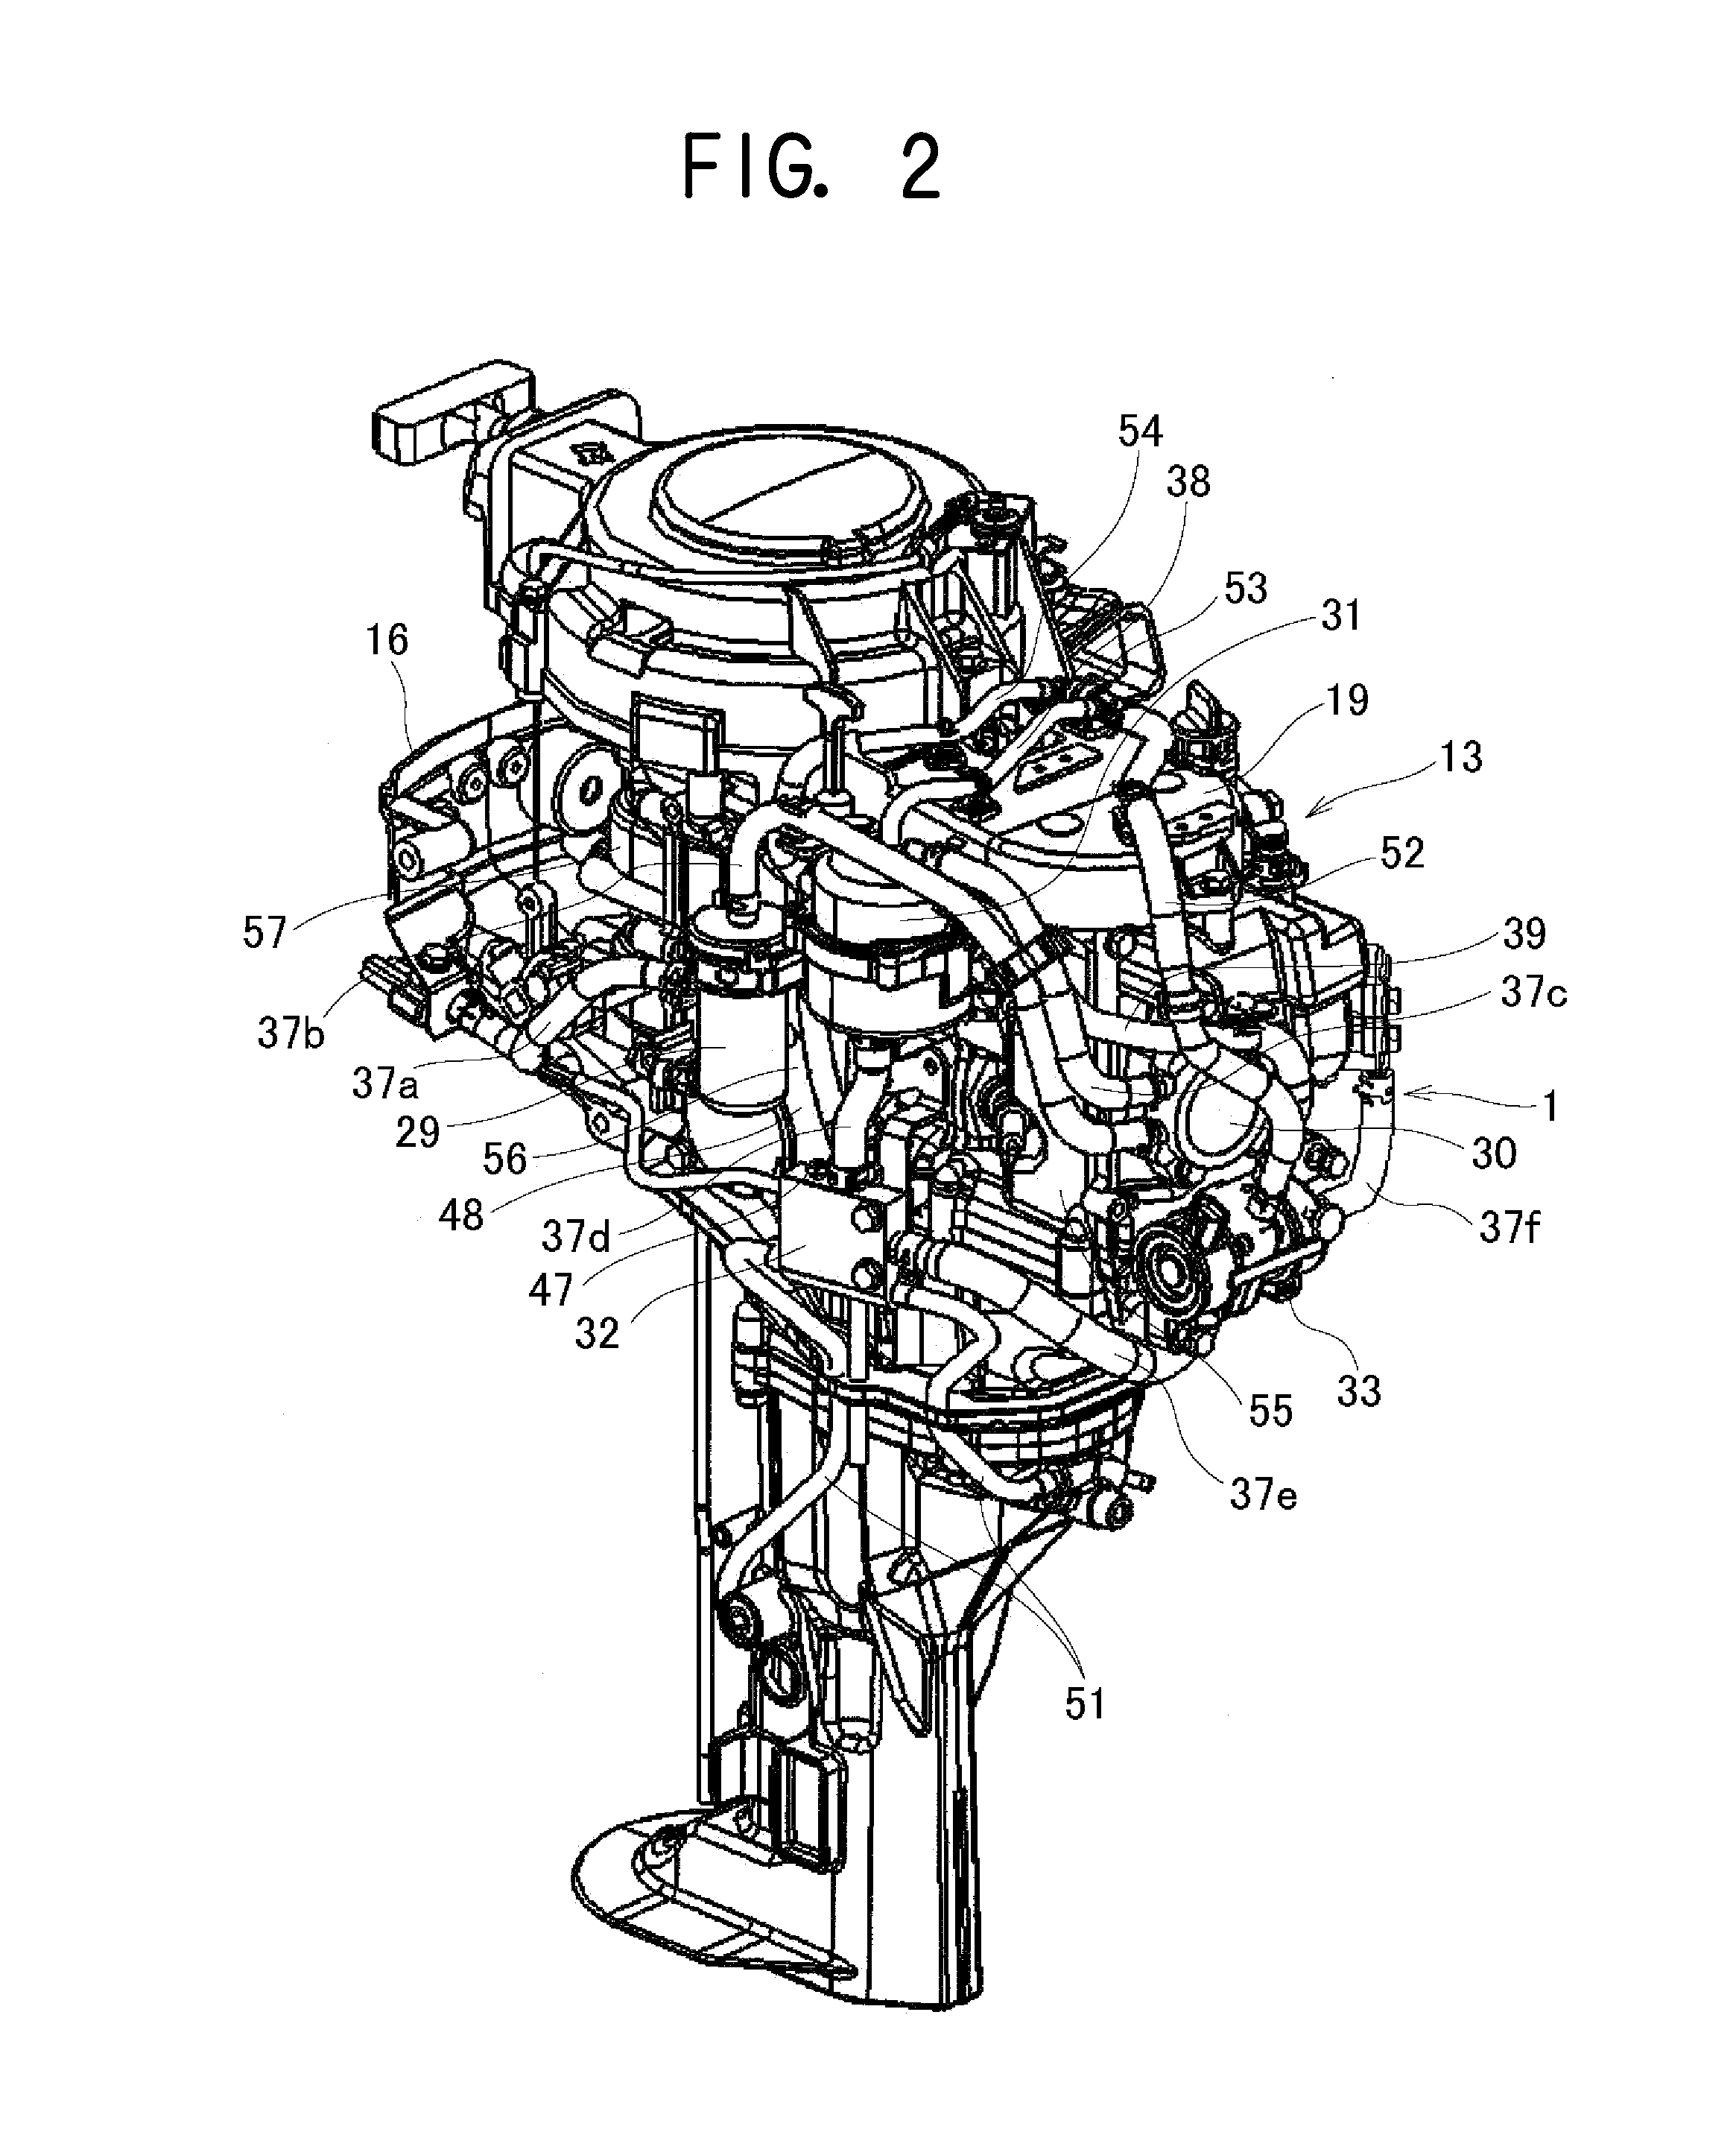 Fuel supply system of outboard motor